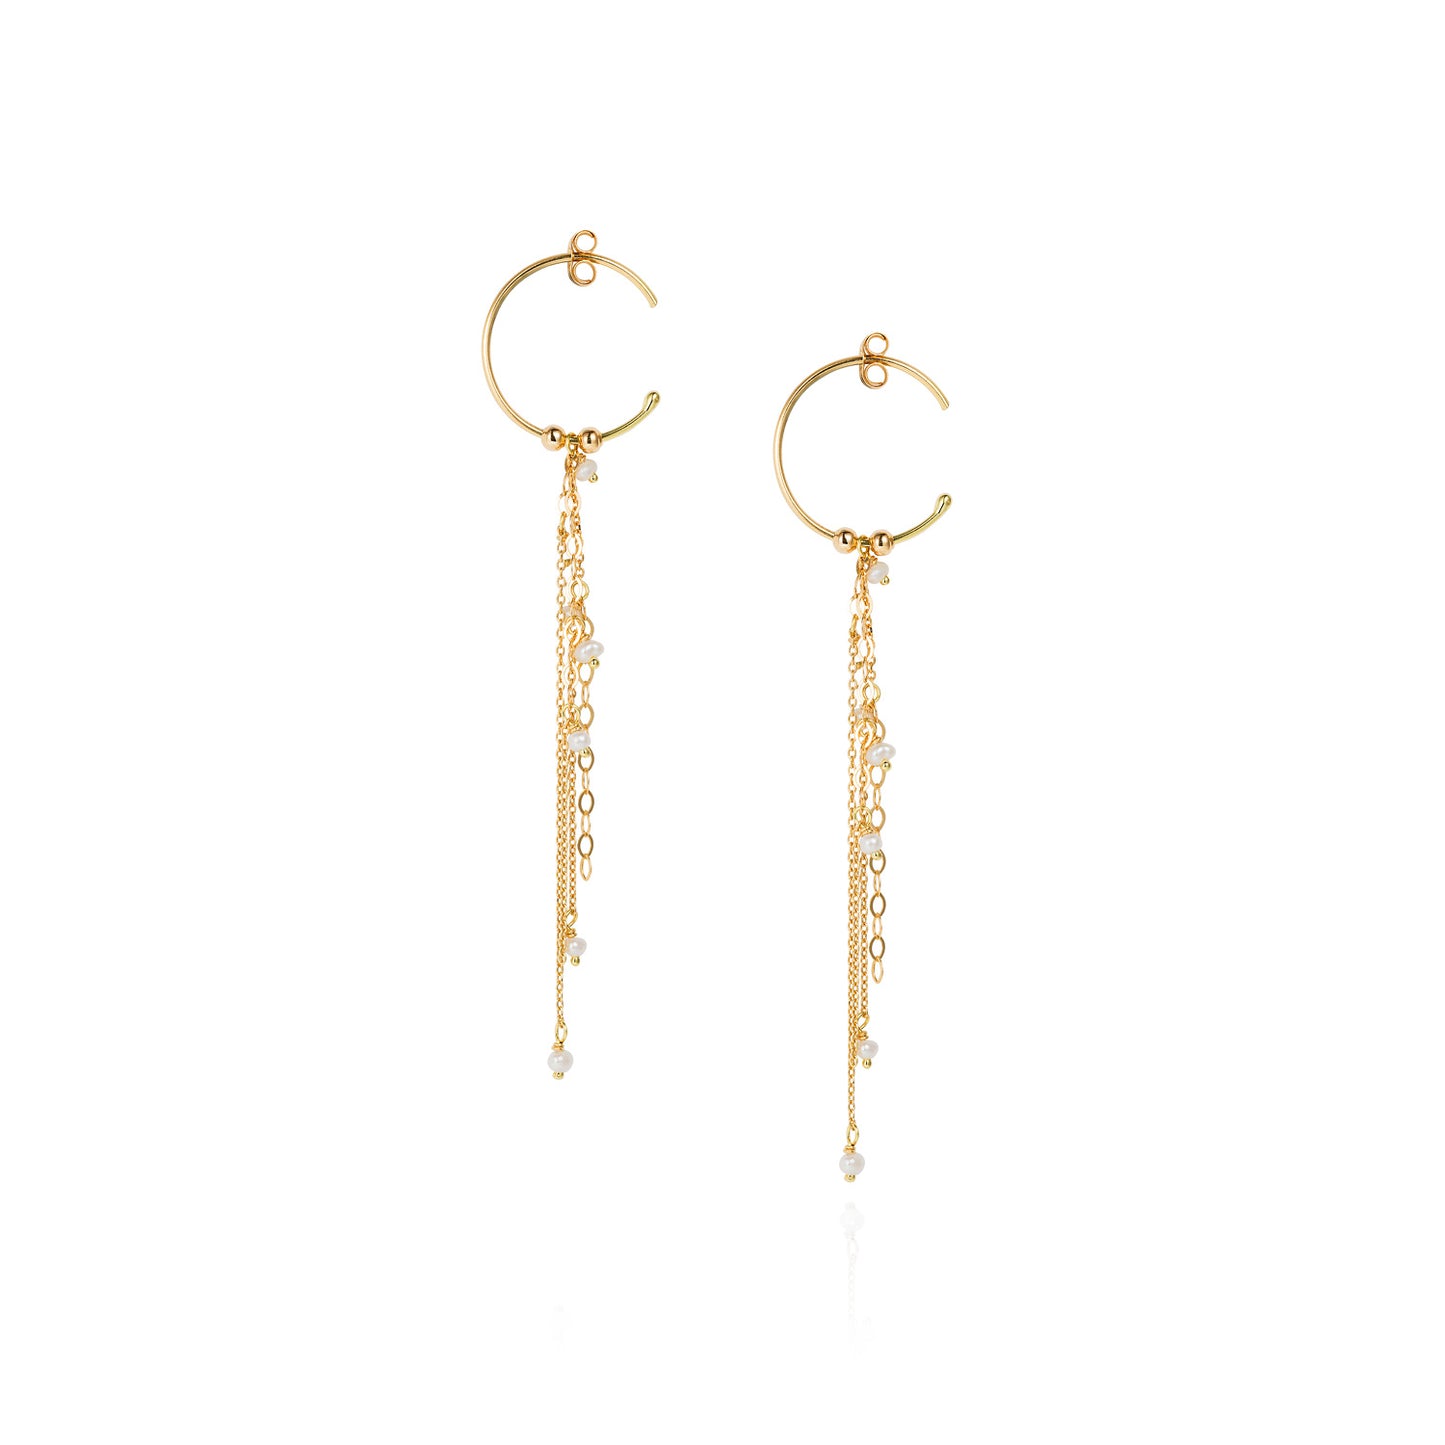 18ct yellow gold fine hoop earrings with layered strands and seed pearls